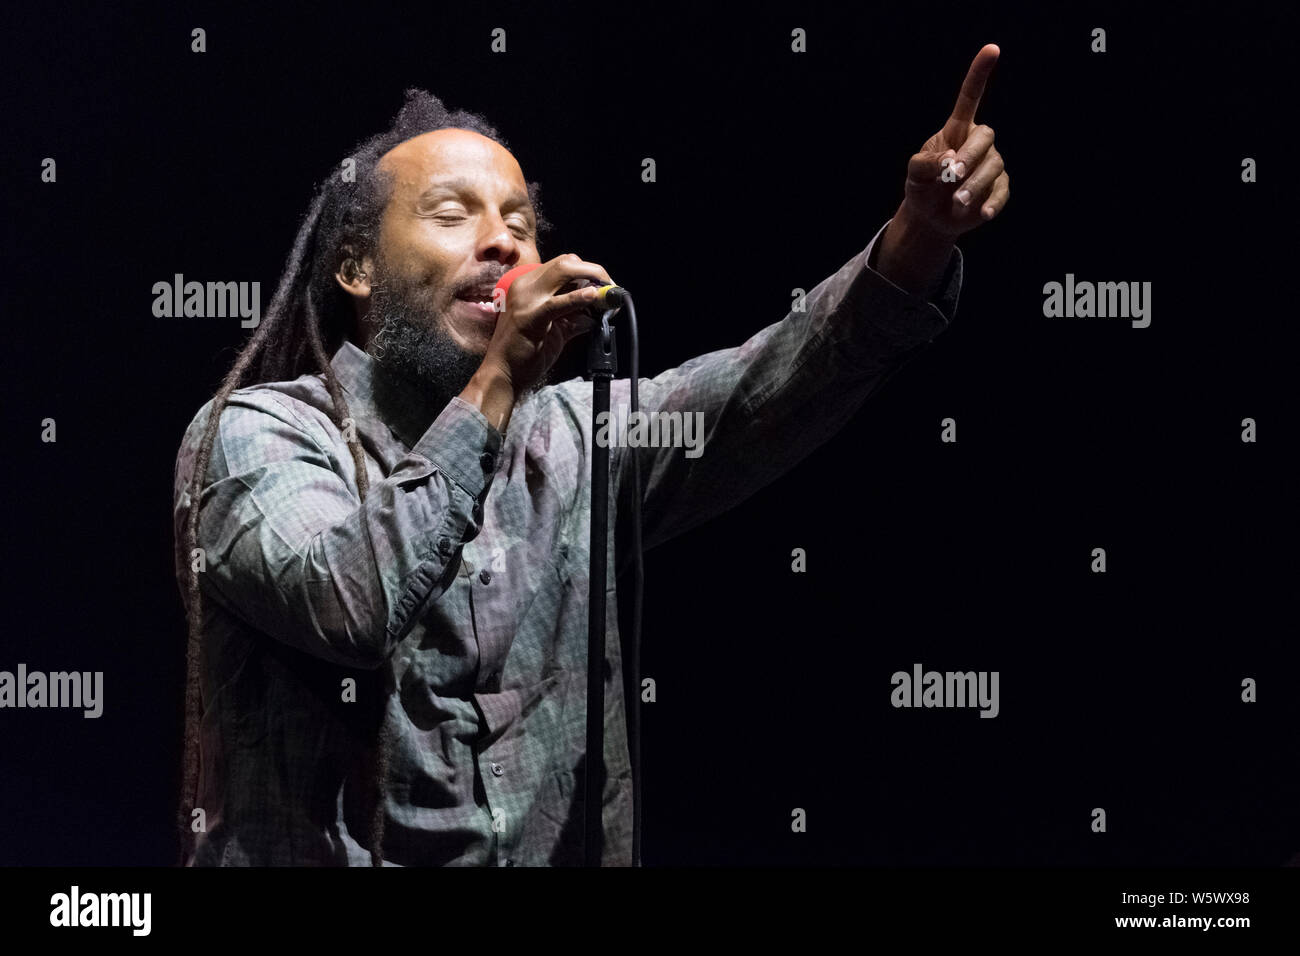 Ziggy Marley performing at the WOMAD festival, Charlton Park, UK. July 26, 2019 Stock Photo